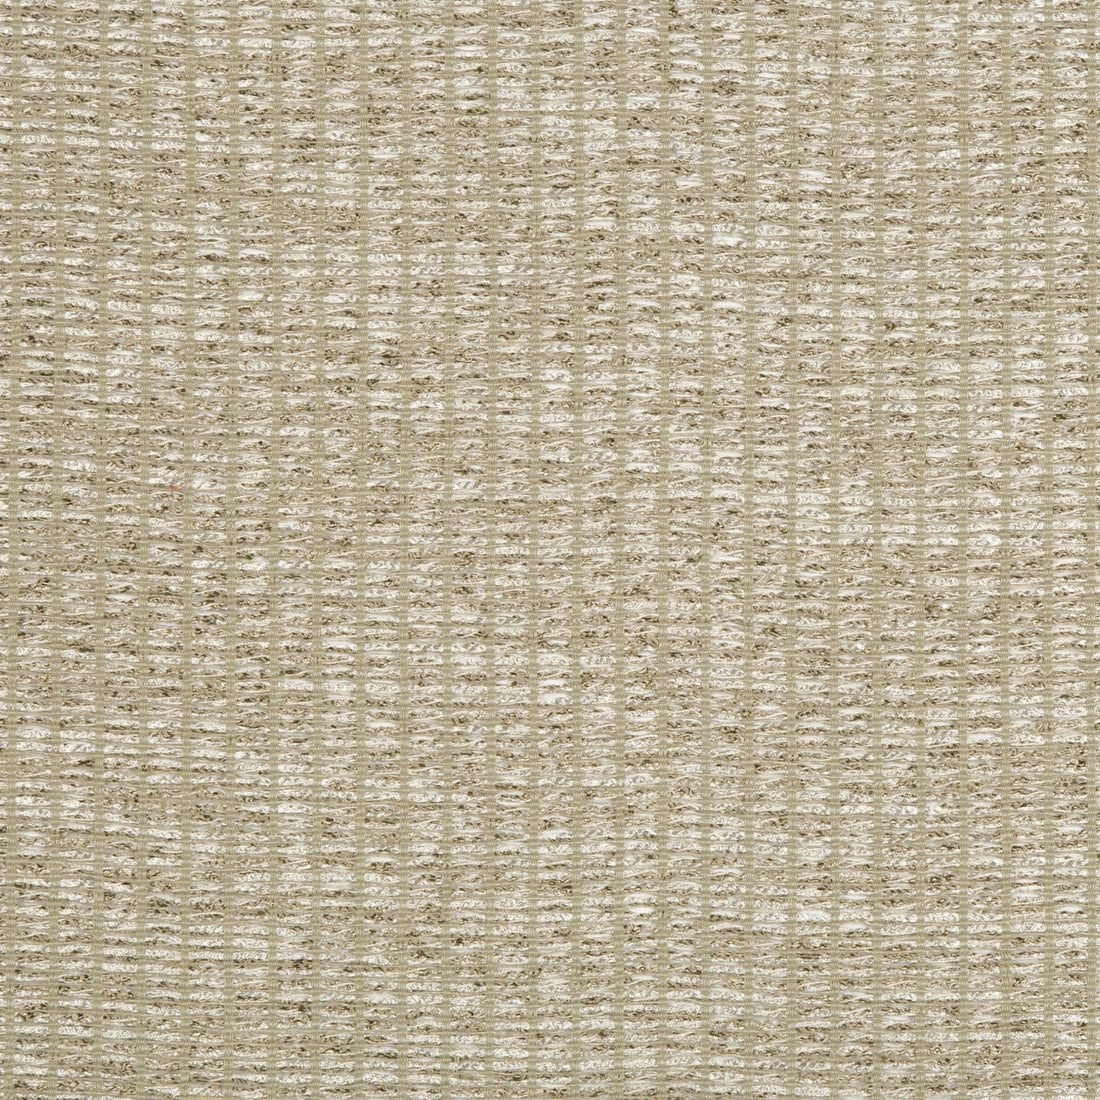 Bejo Sheer fabric in patina color - pattern 3668.106.0 - by Kravet Couture in the Calvin Klein Collection collection